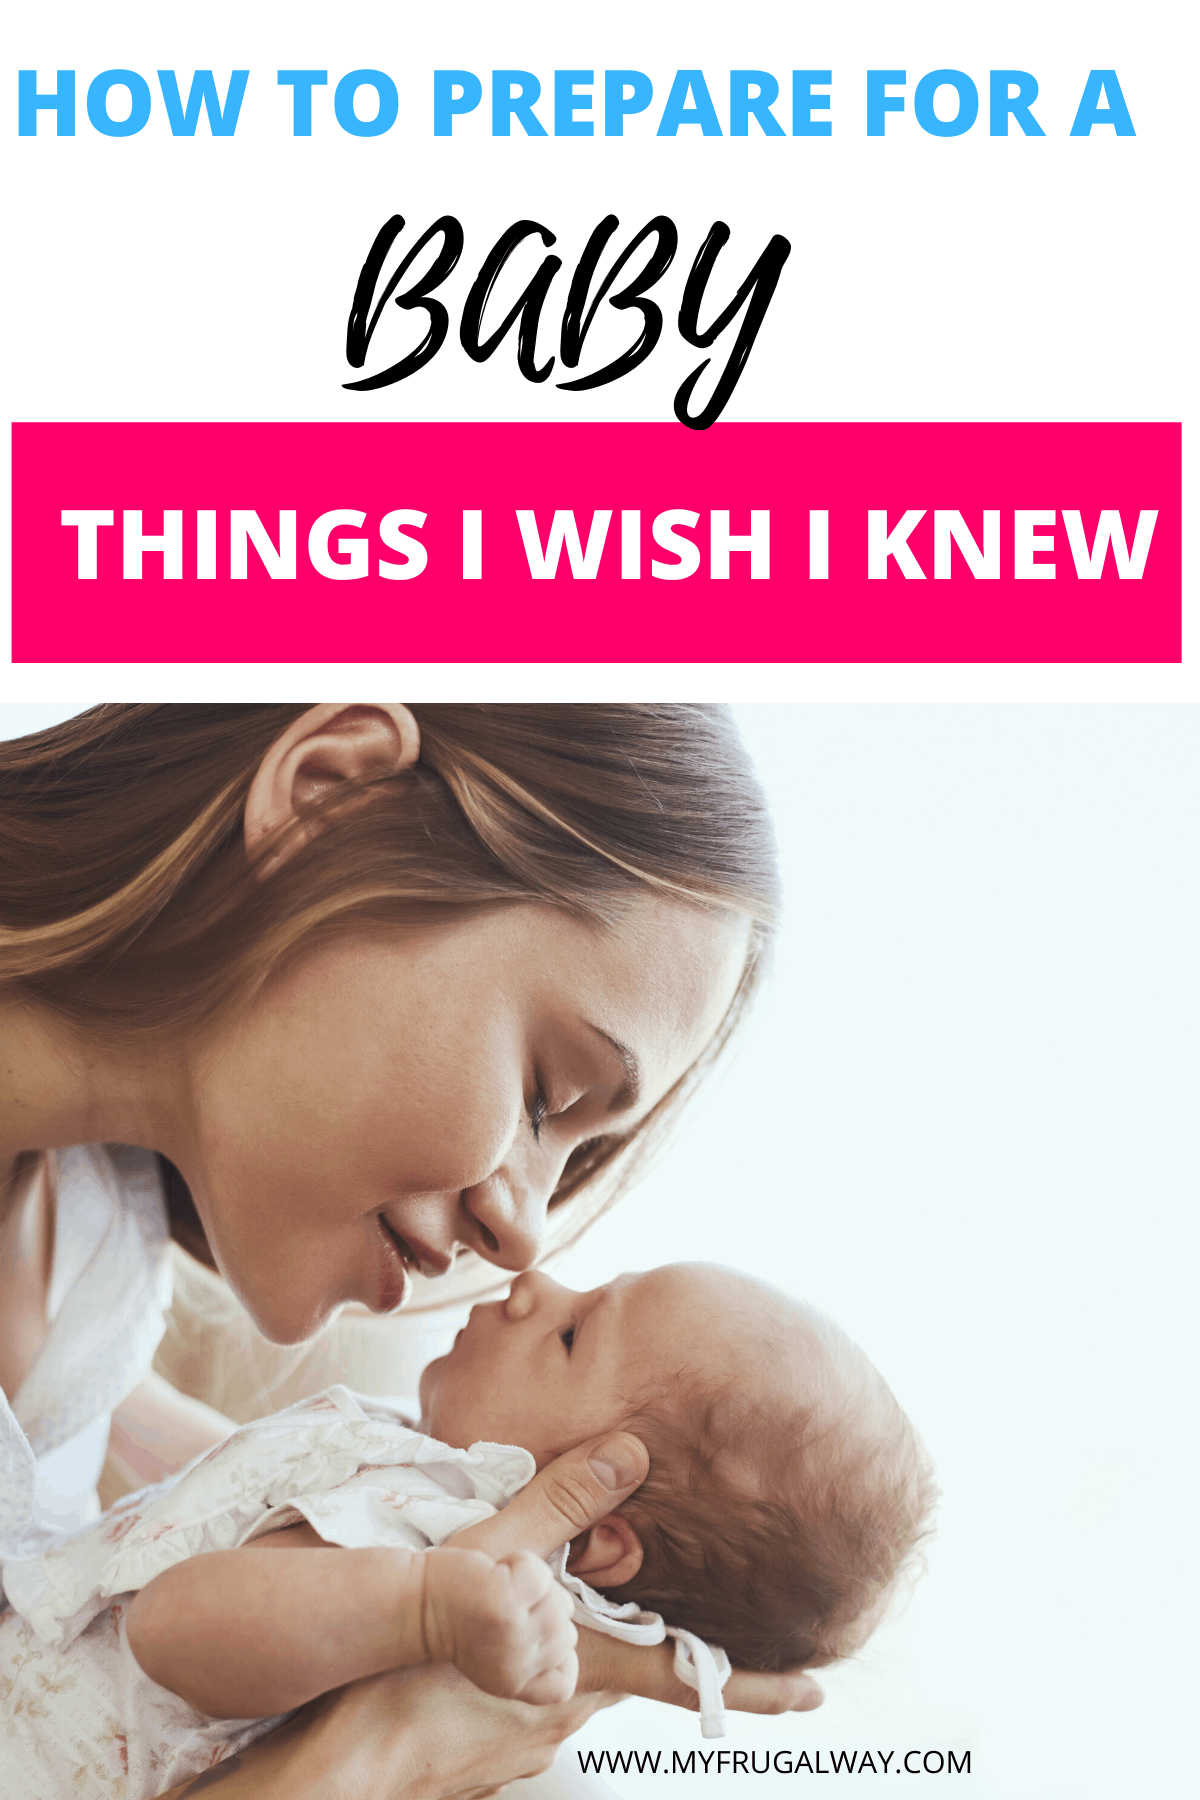 Things i wish i knew before having a baby.Tips for new moms to prepare for a baby . What to expect with a newborn . #parenting #newmom #newborn #momlife #parentingadvise